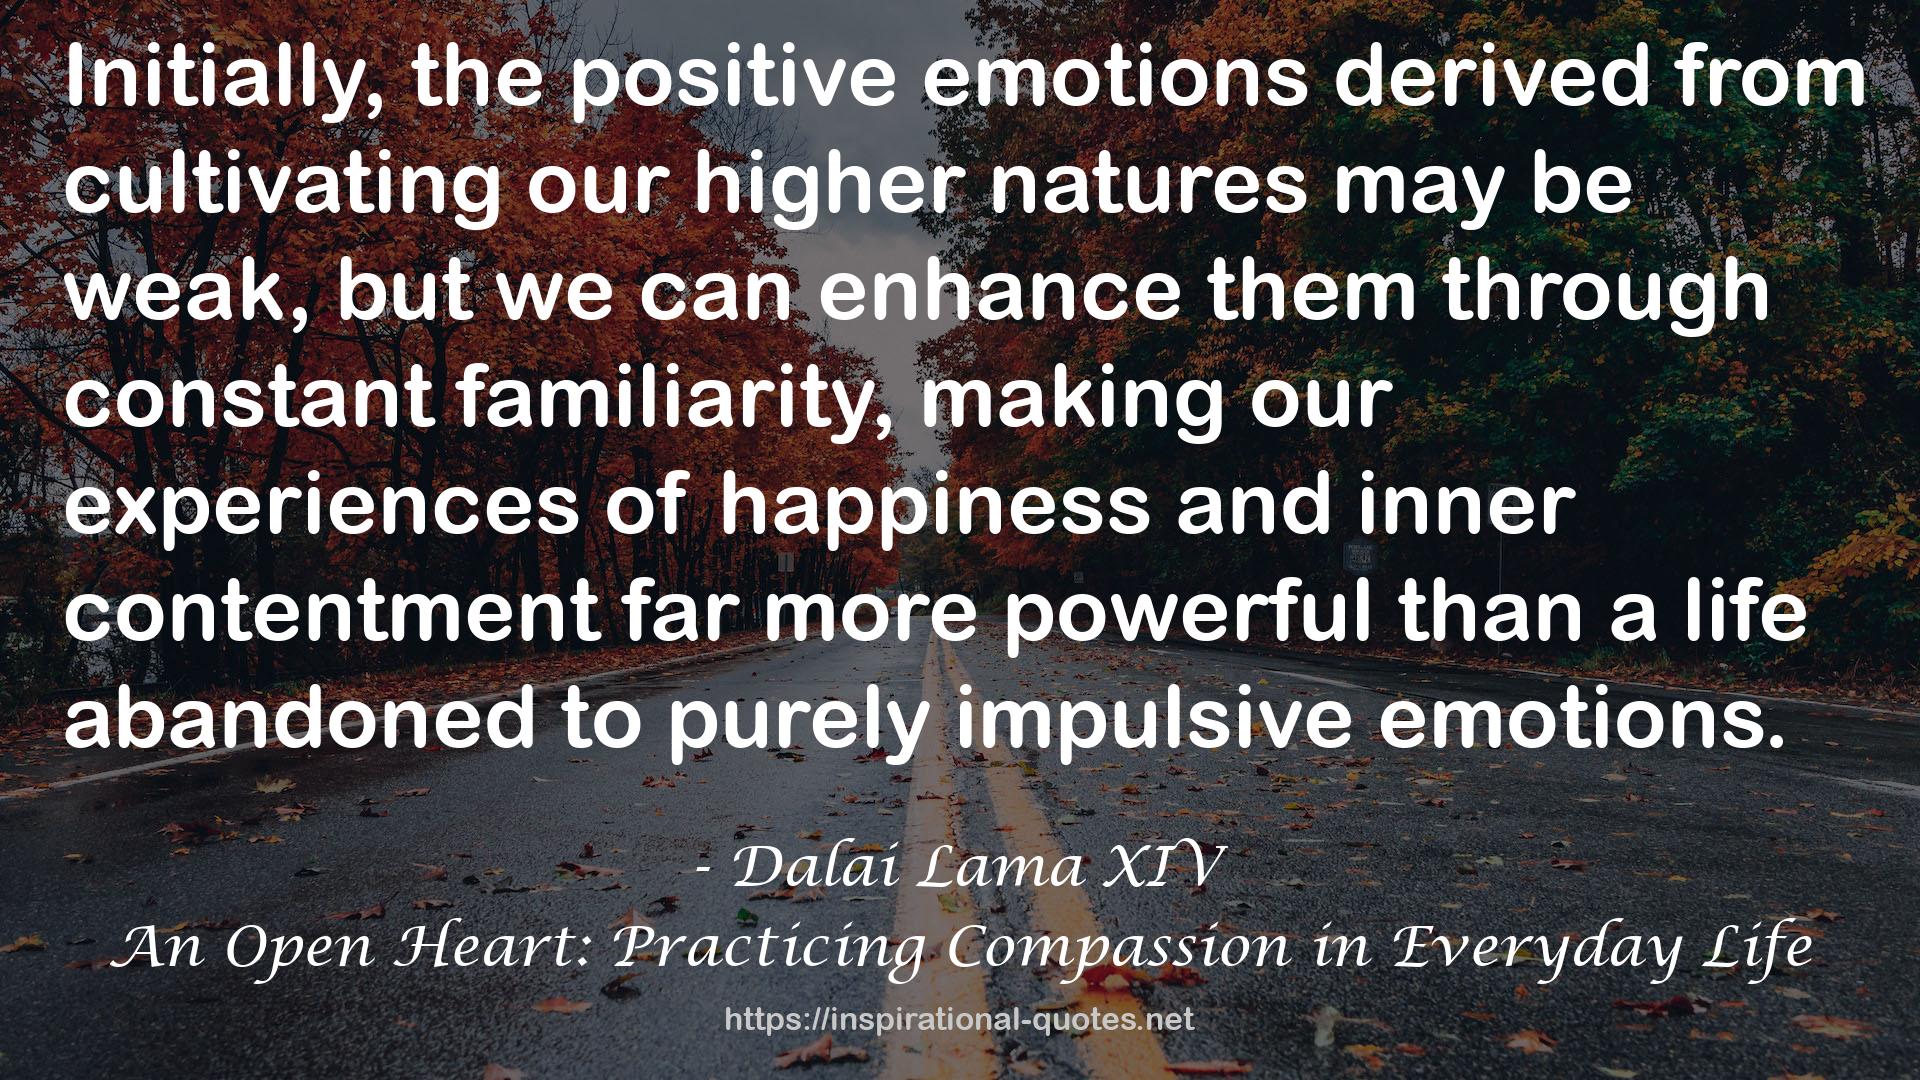 An Open Heart: Practicing Compassion in Everyday Life QUOTES